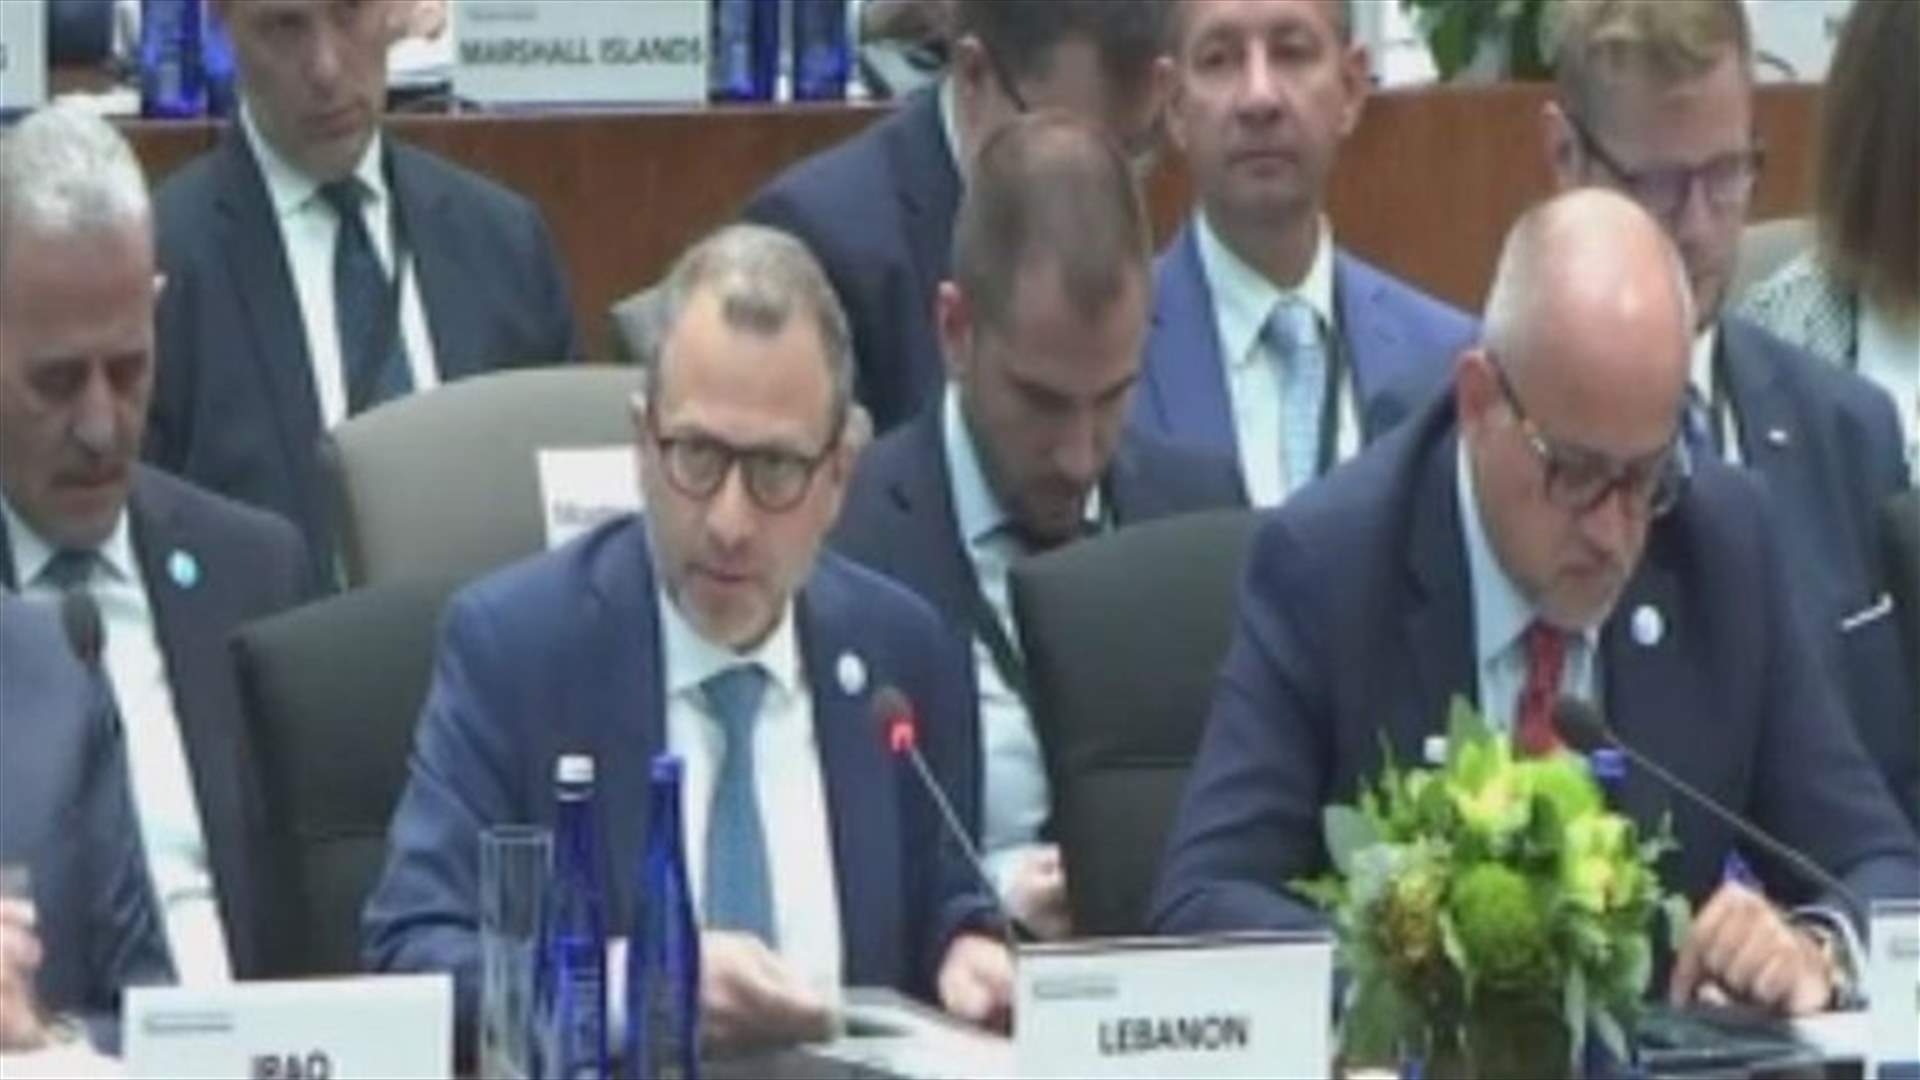 Bassil from Washington: The will for coexistence in Lebanon is stronger than the system’s fragility